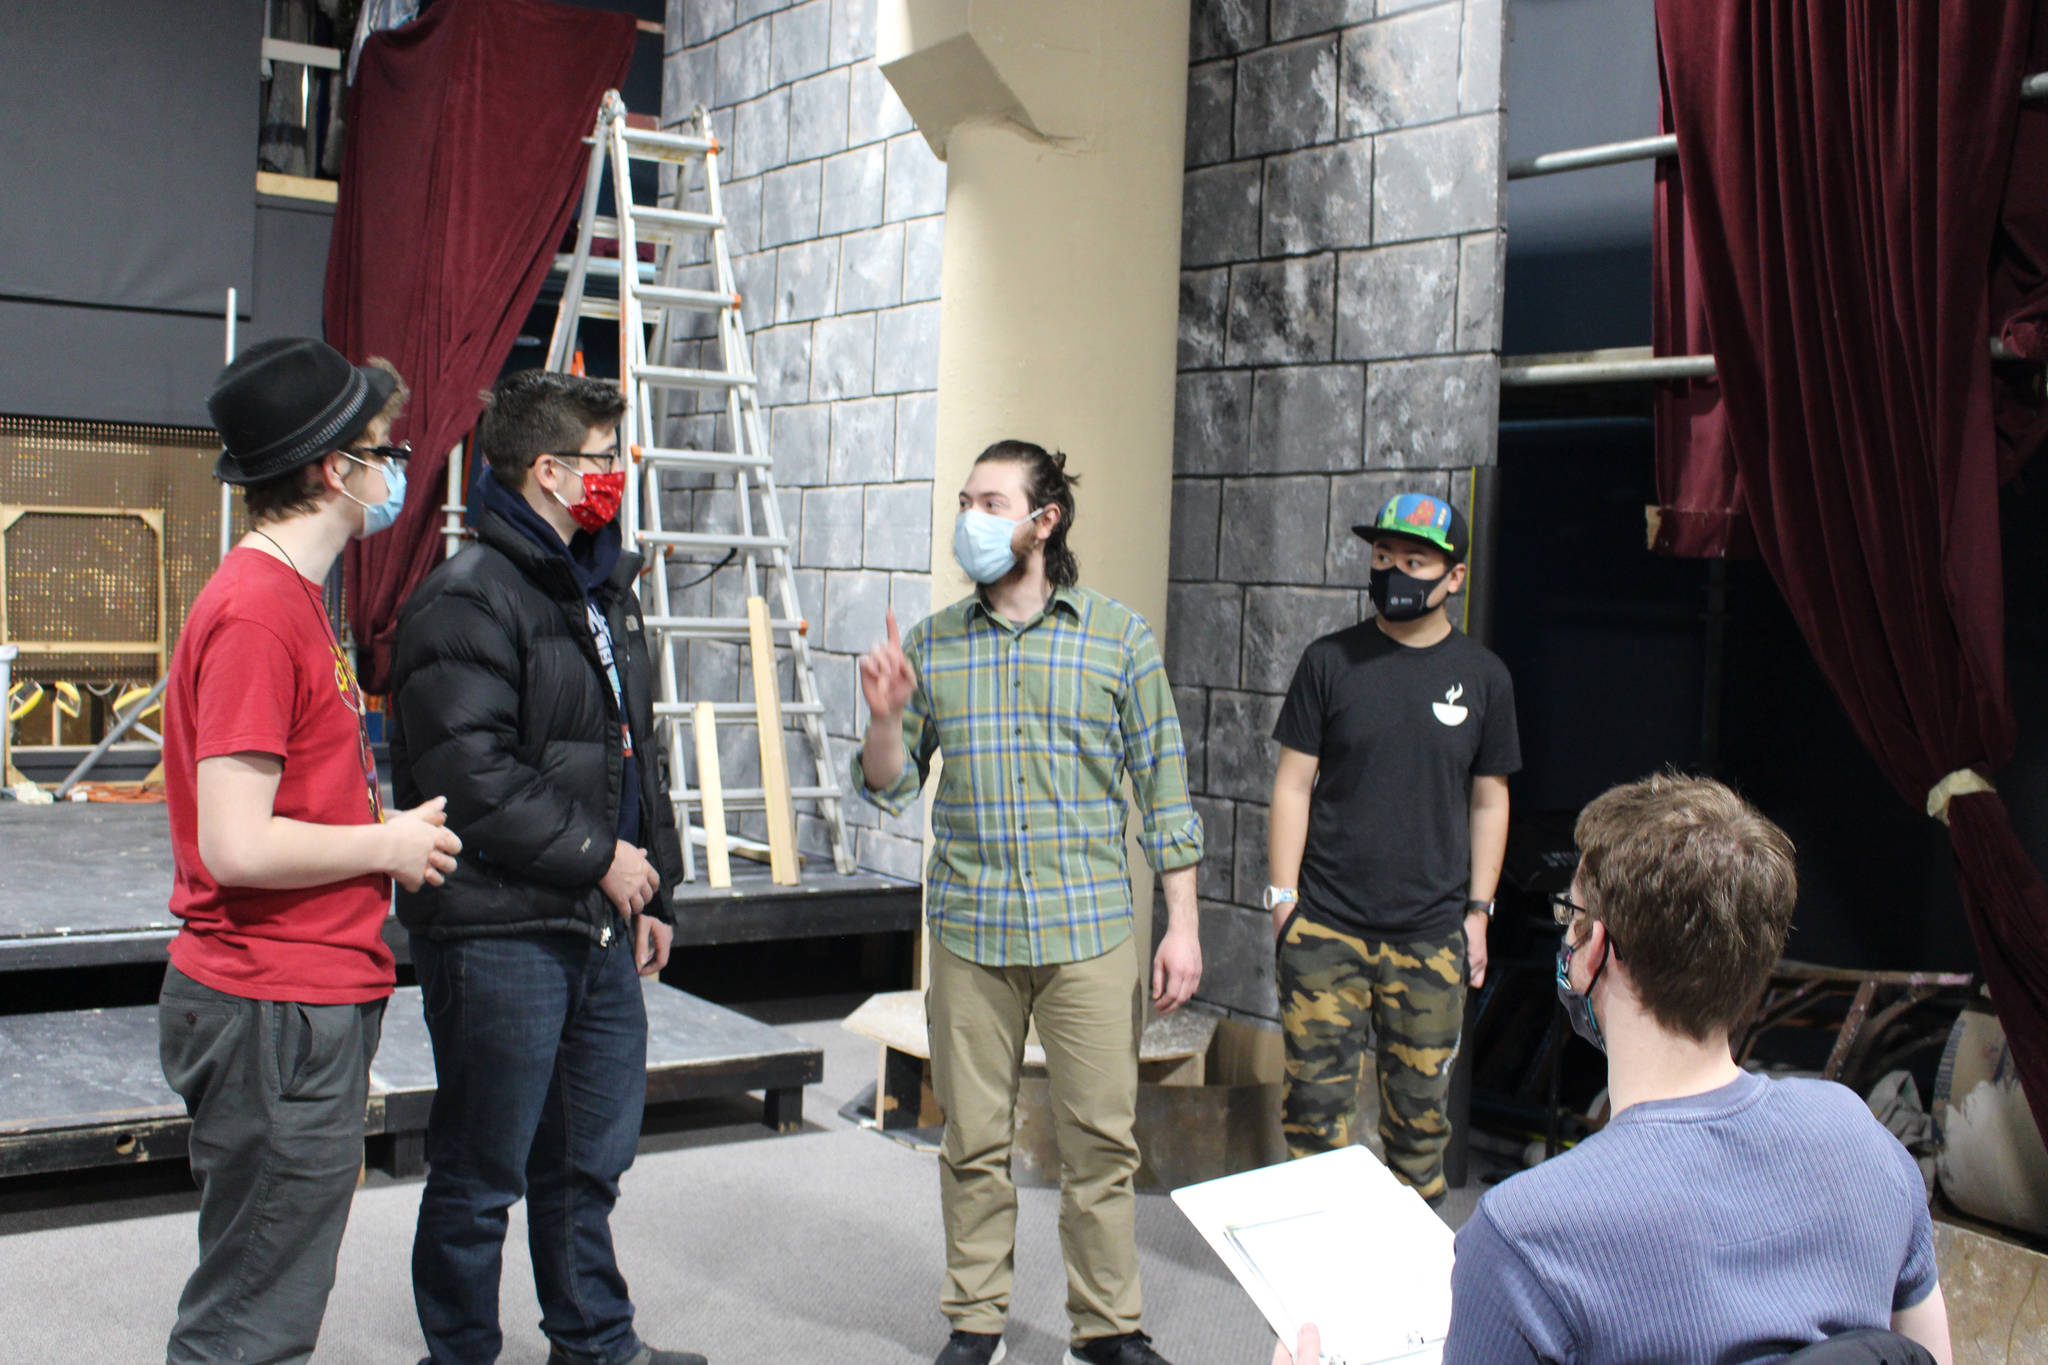 Members of the Kenai Performers rehearse a scene from “Murder in the Cathedral” at the Kenai Performers black box theater in Soldotna, Alaska, on Jan. 16, 2021. From left: Josiah Burton, Jaron Swanson, Raleigh Van Natta, Spring Sibayan and director Paul Morin. (Photo by Brian Mazurek/Peninsula Clarion)